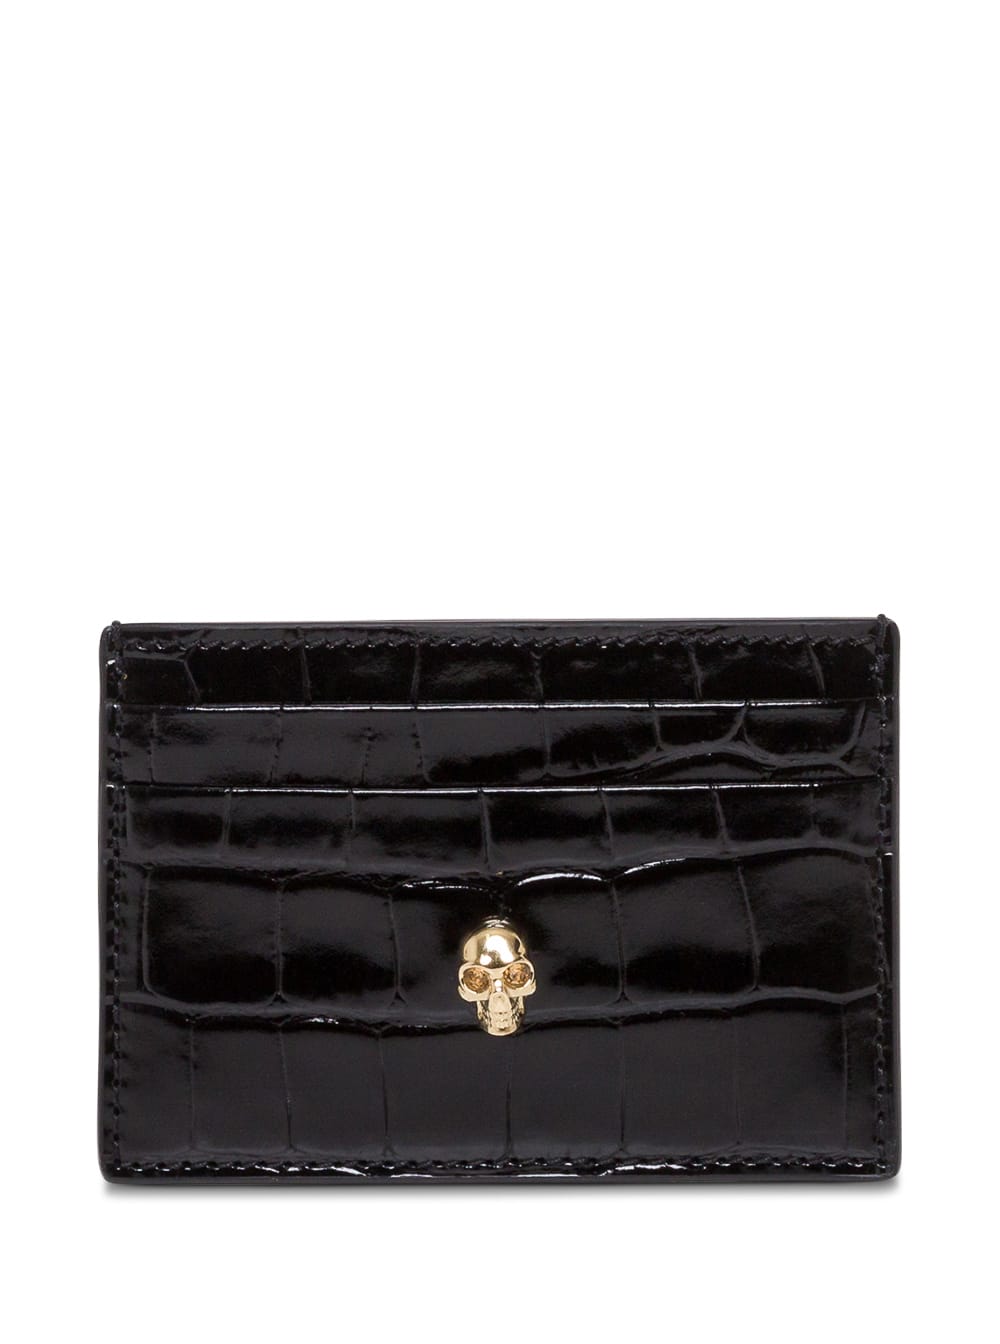 Alexander Mcqueen Womans Black Crocodile Printed Leather Card Holder